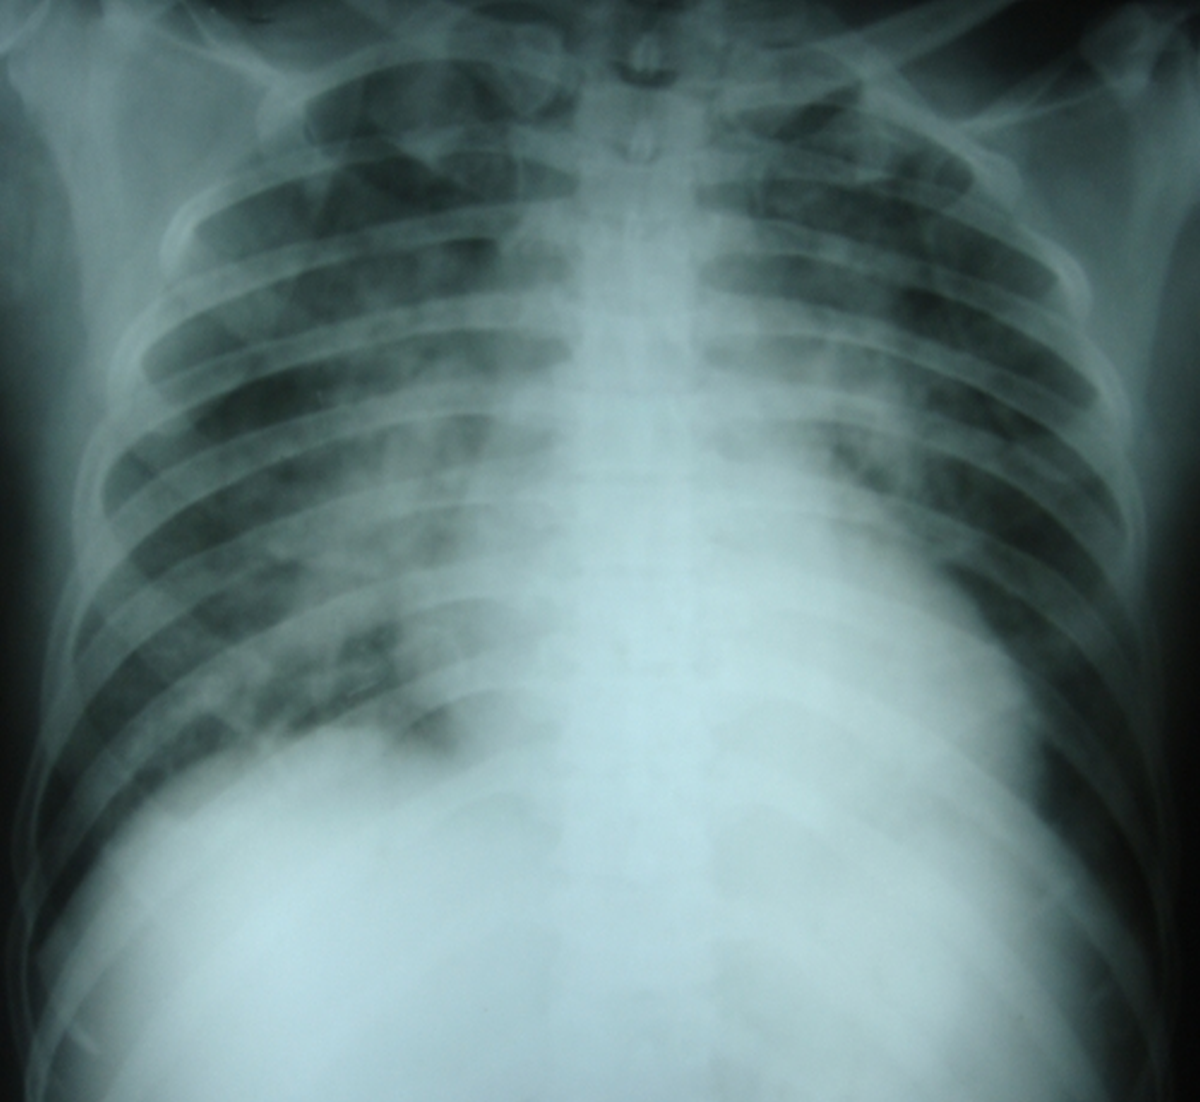 Chest X-ray supine view with pulmonary congestion